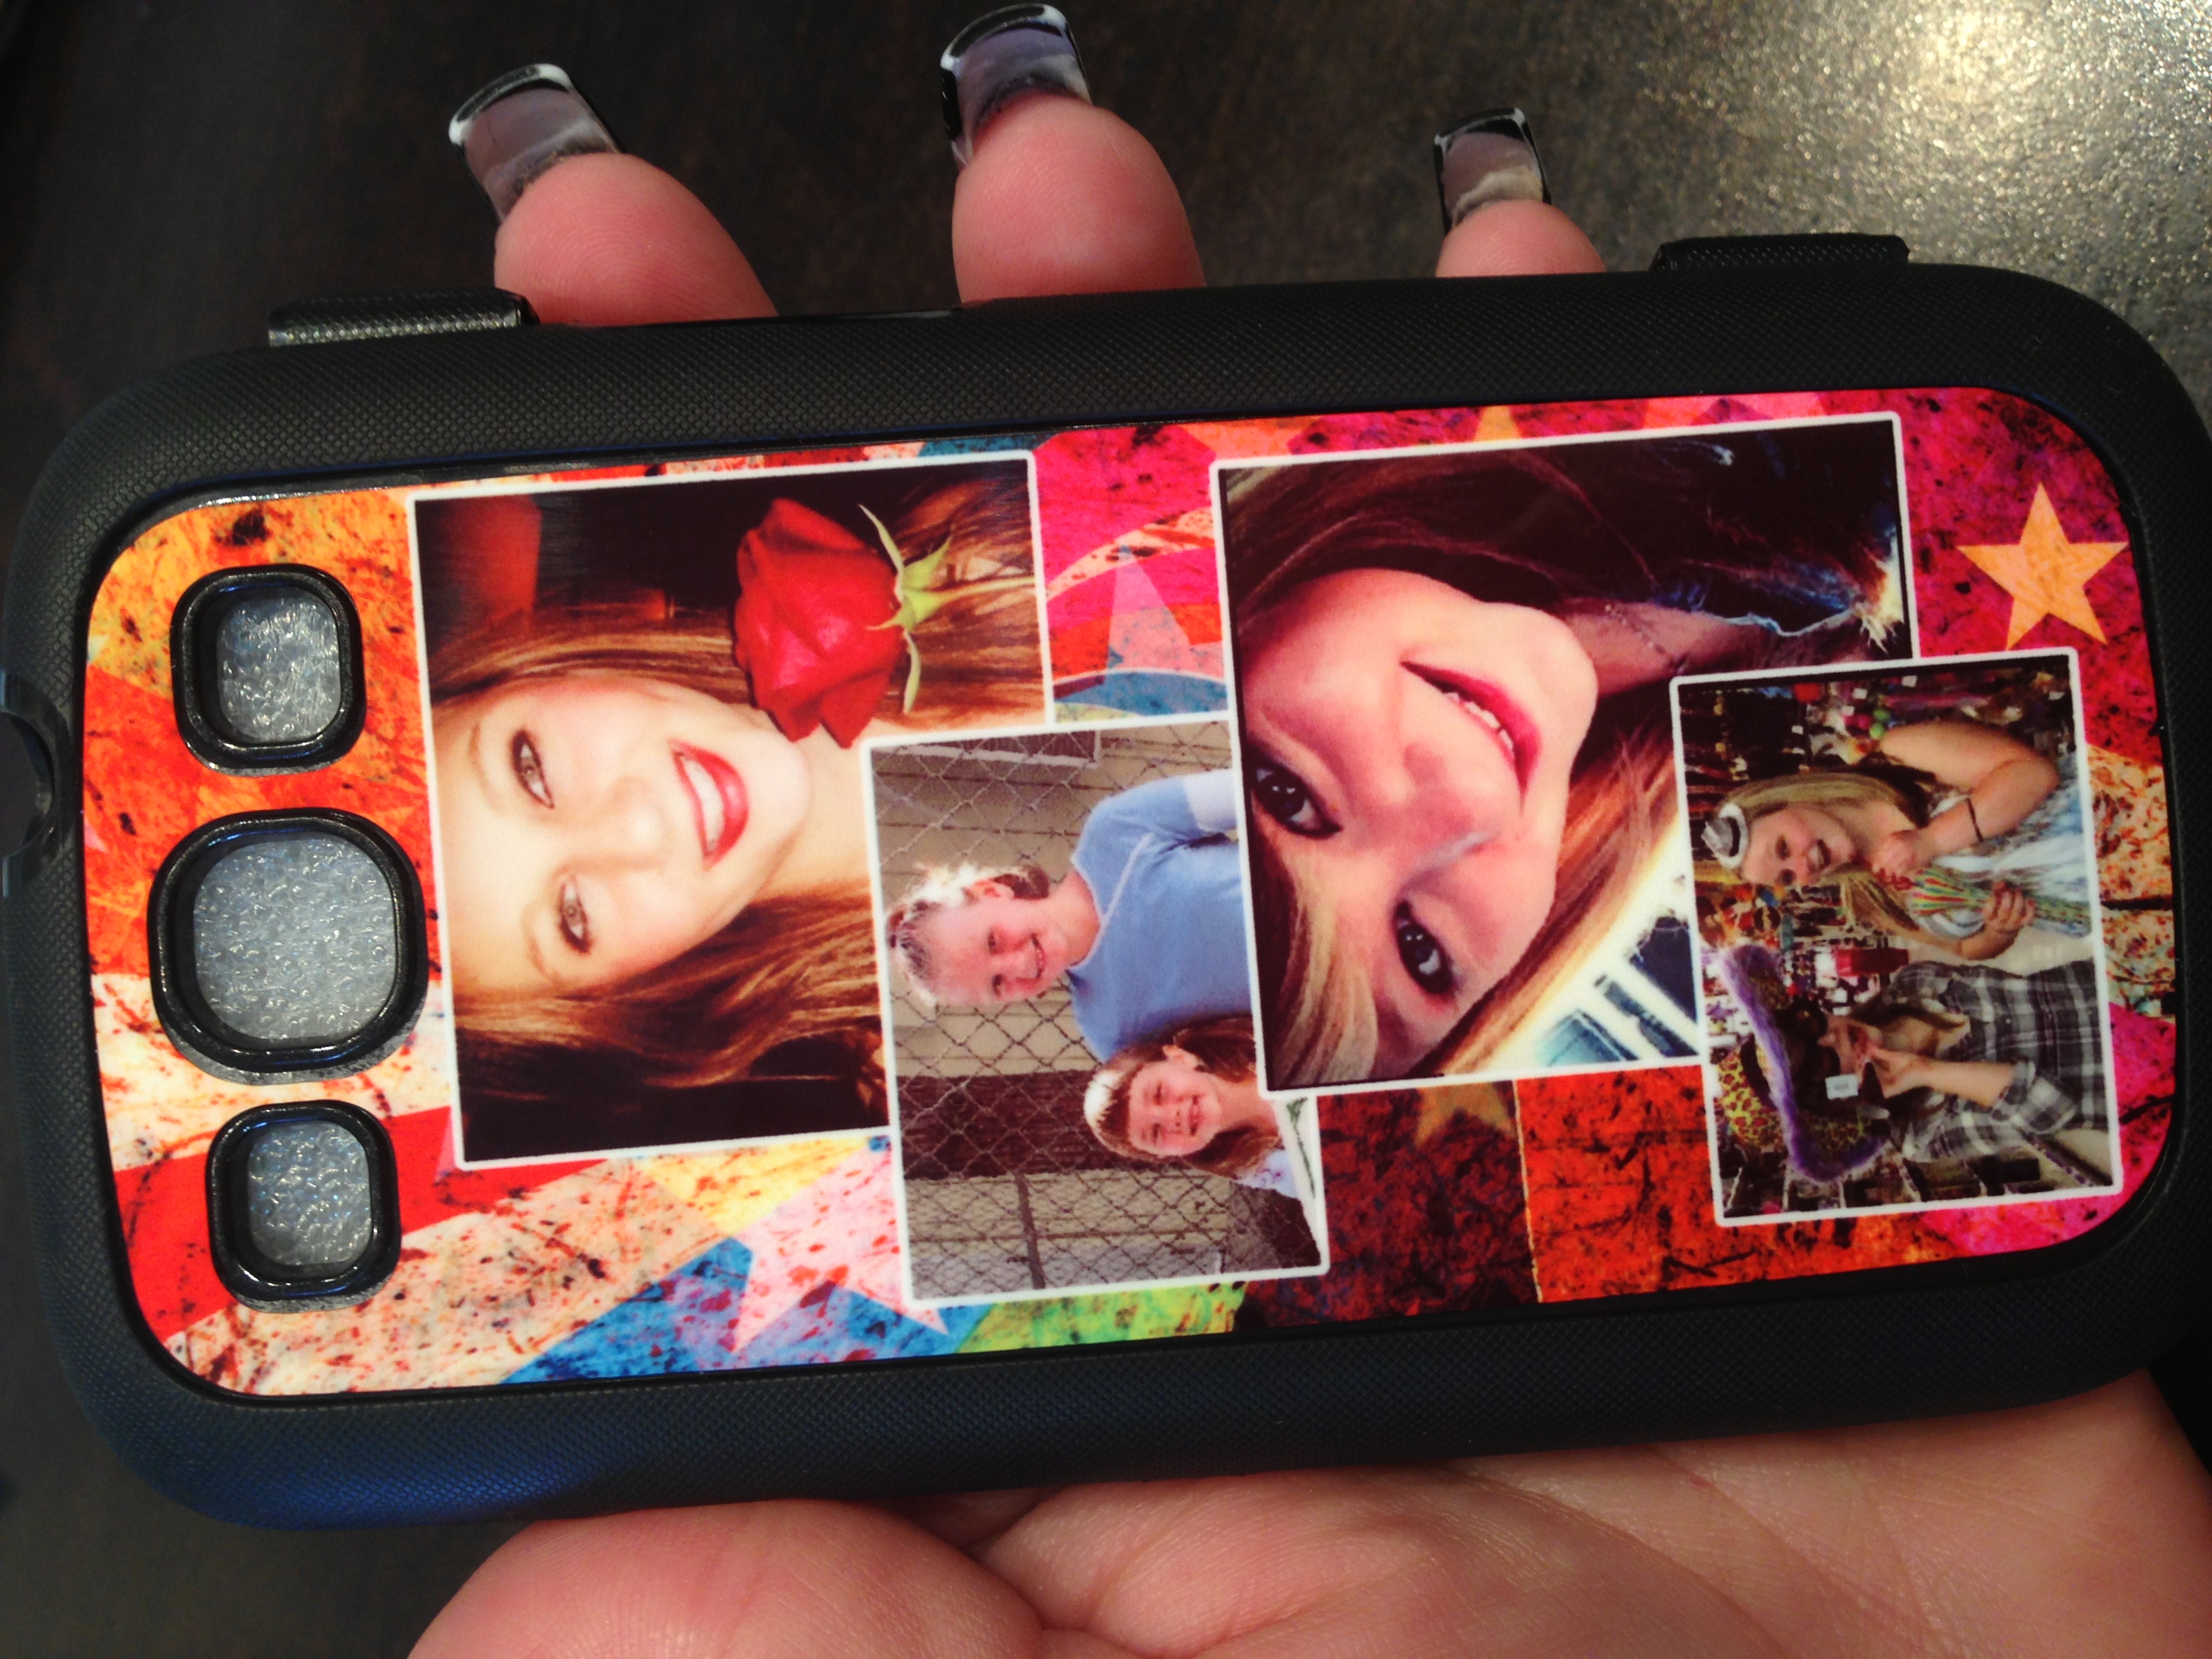 Krewe Case made with sublimation printing